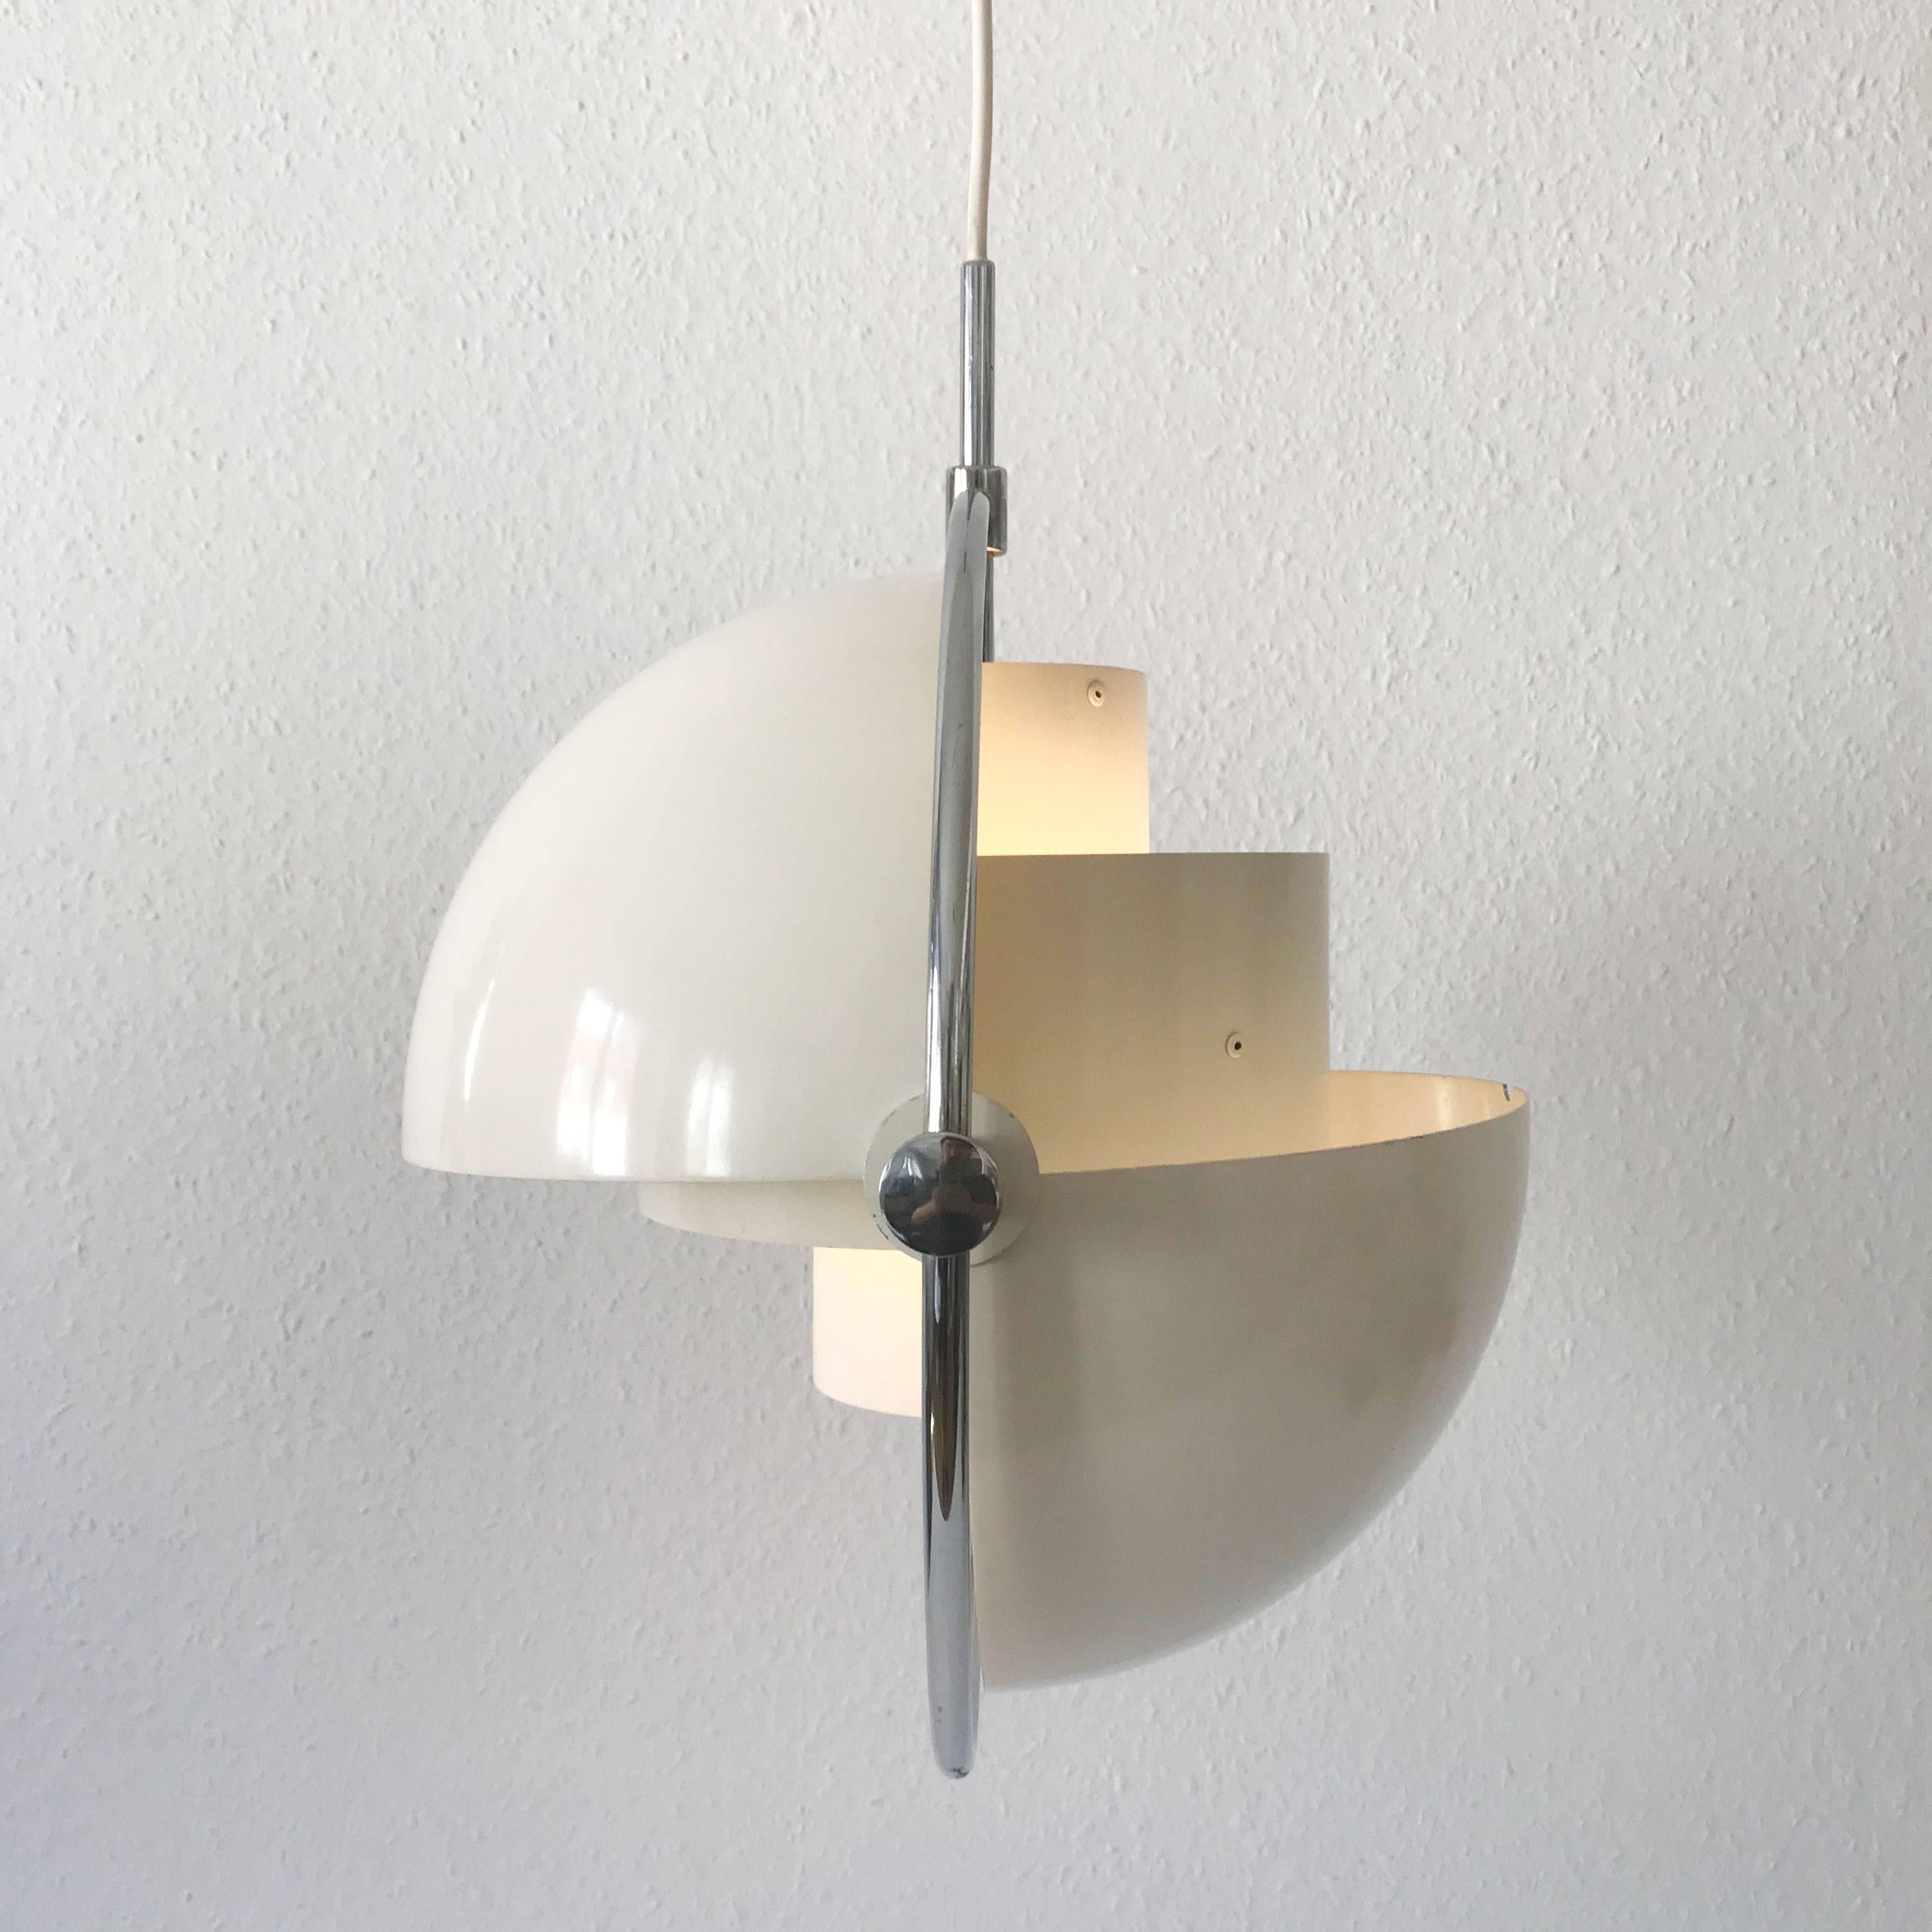 Elegant & original Mid Century Modern 'Multi-Lite' pendant lamp by Louis Weisdorf, 1974. Manufactured by Lyfa, Denmark in 1970s. 
This is a rare white lacquered version. A real light object from Denmark. The lamp shade can be adjusted in various